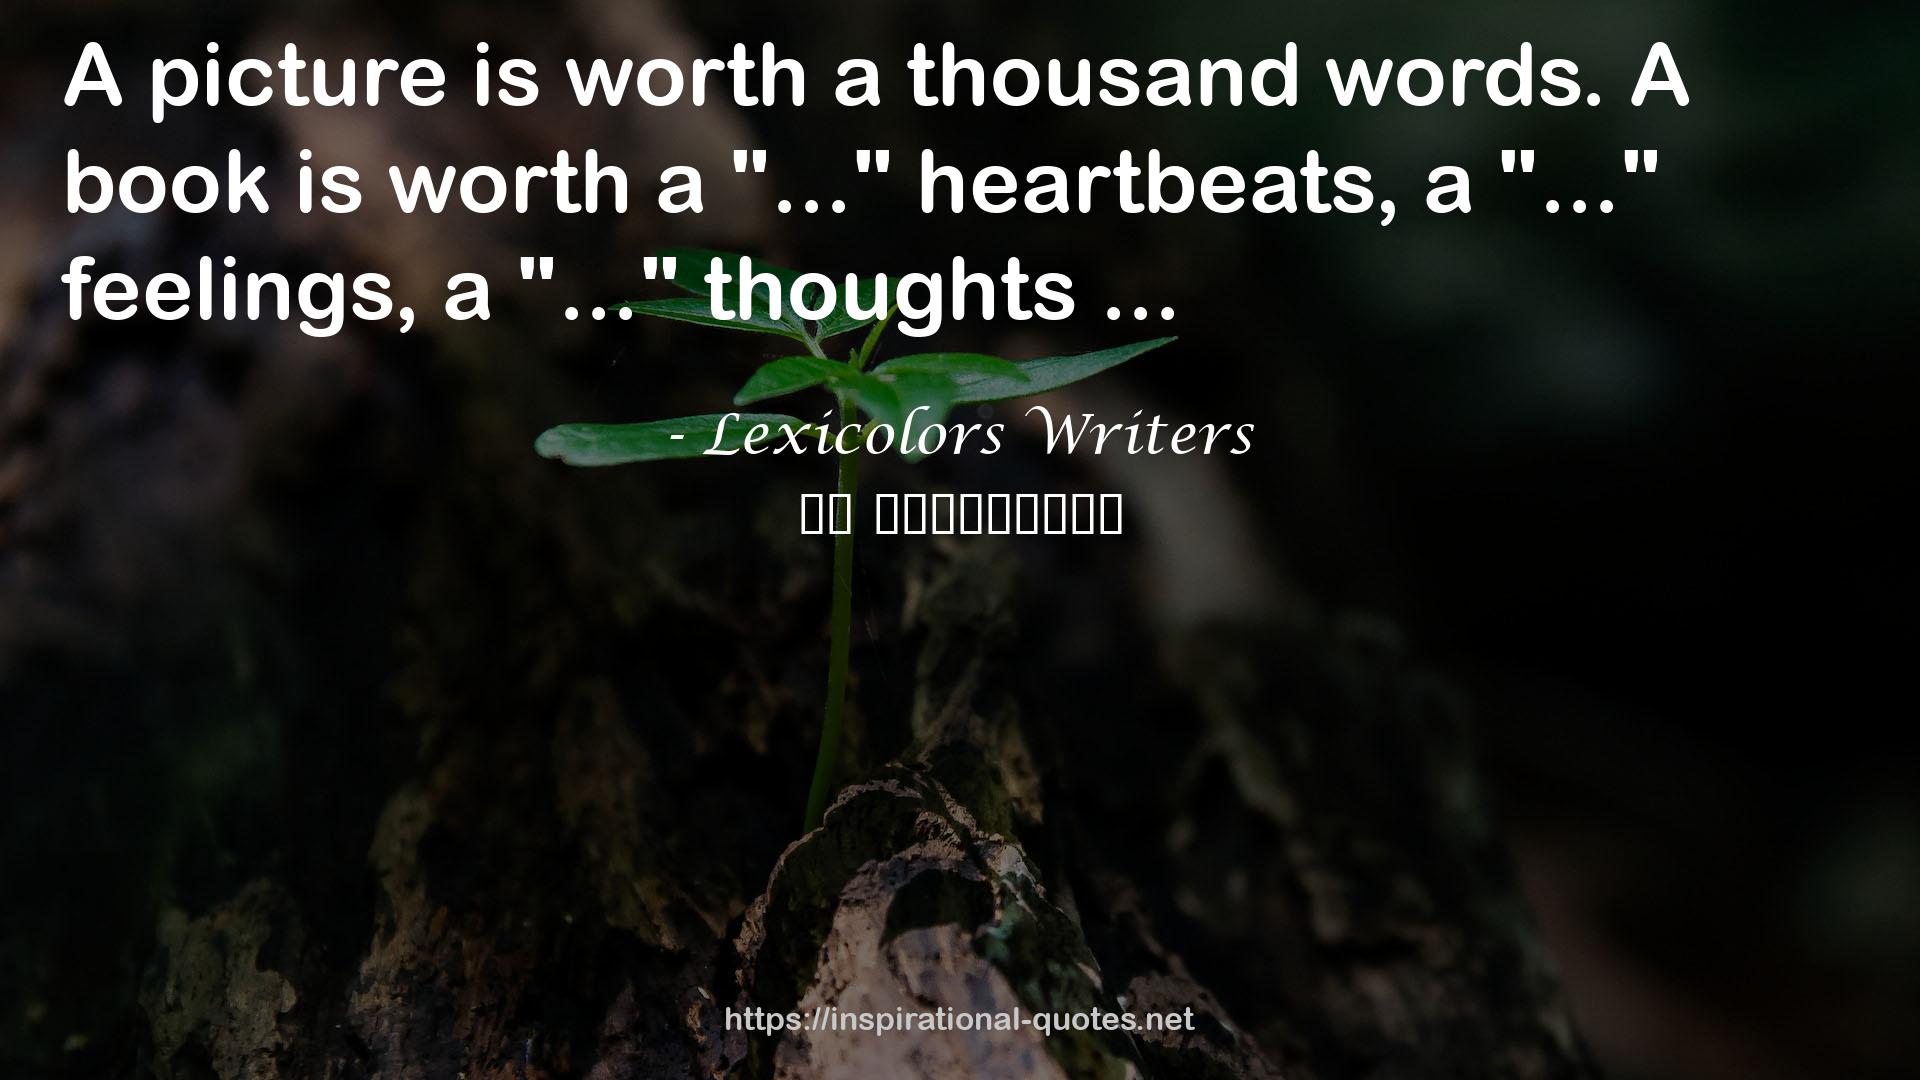 Lexicolors Writers QUOTES